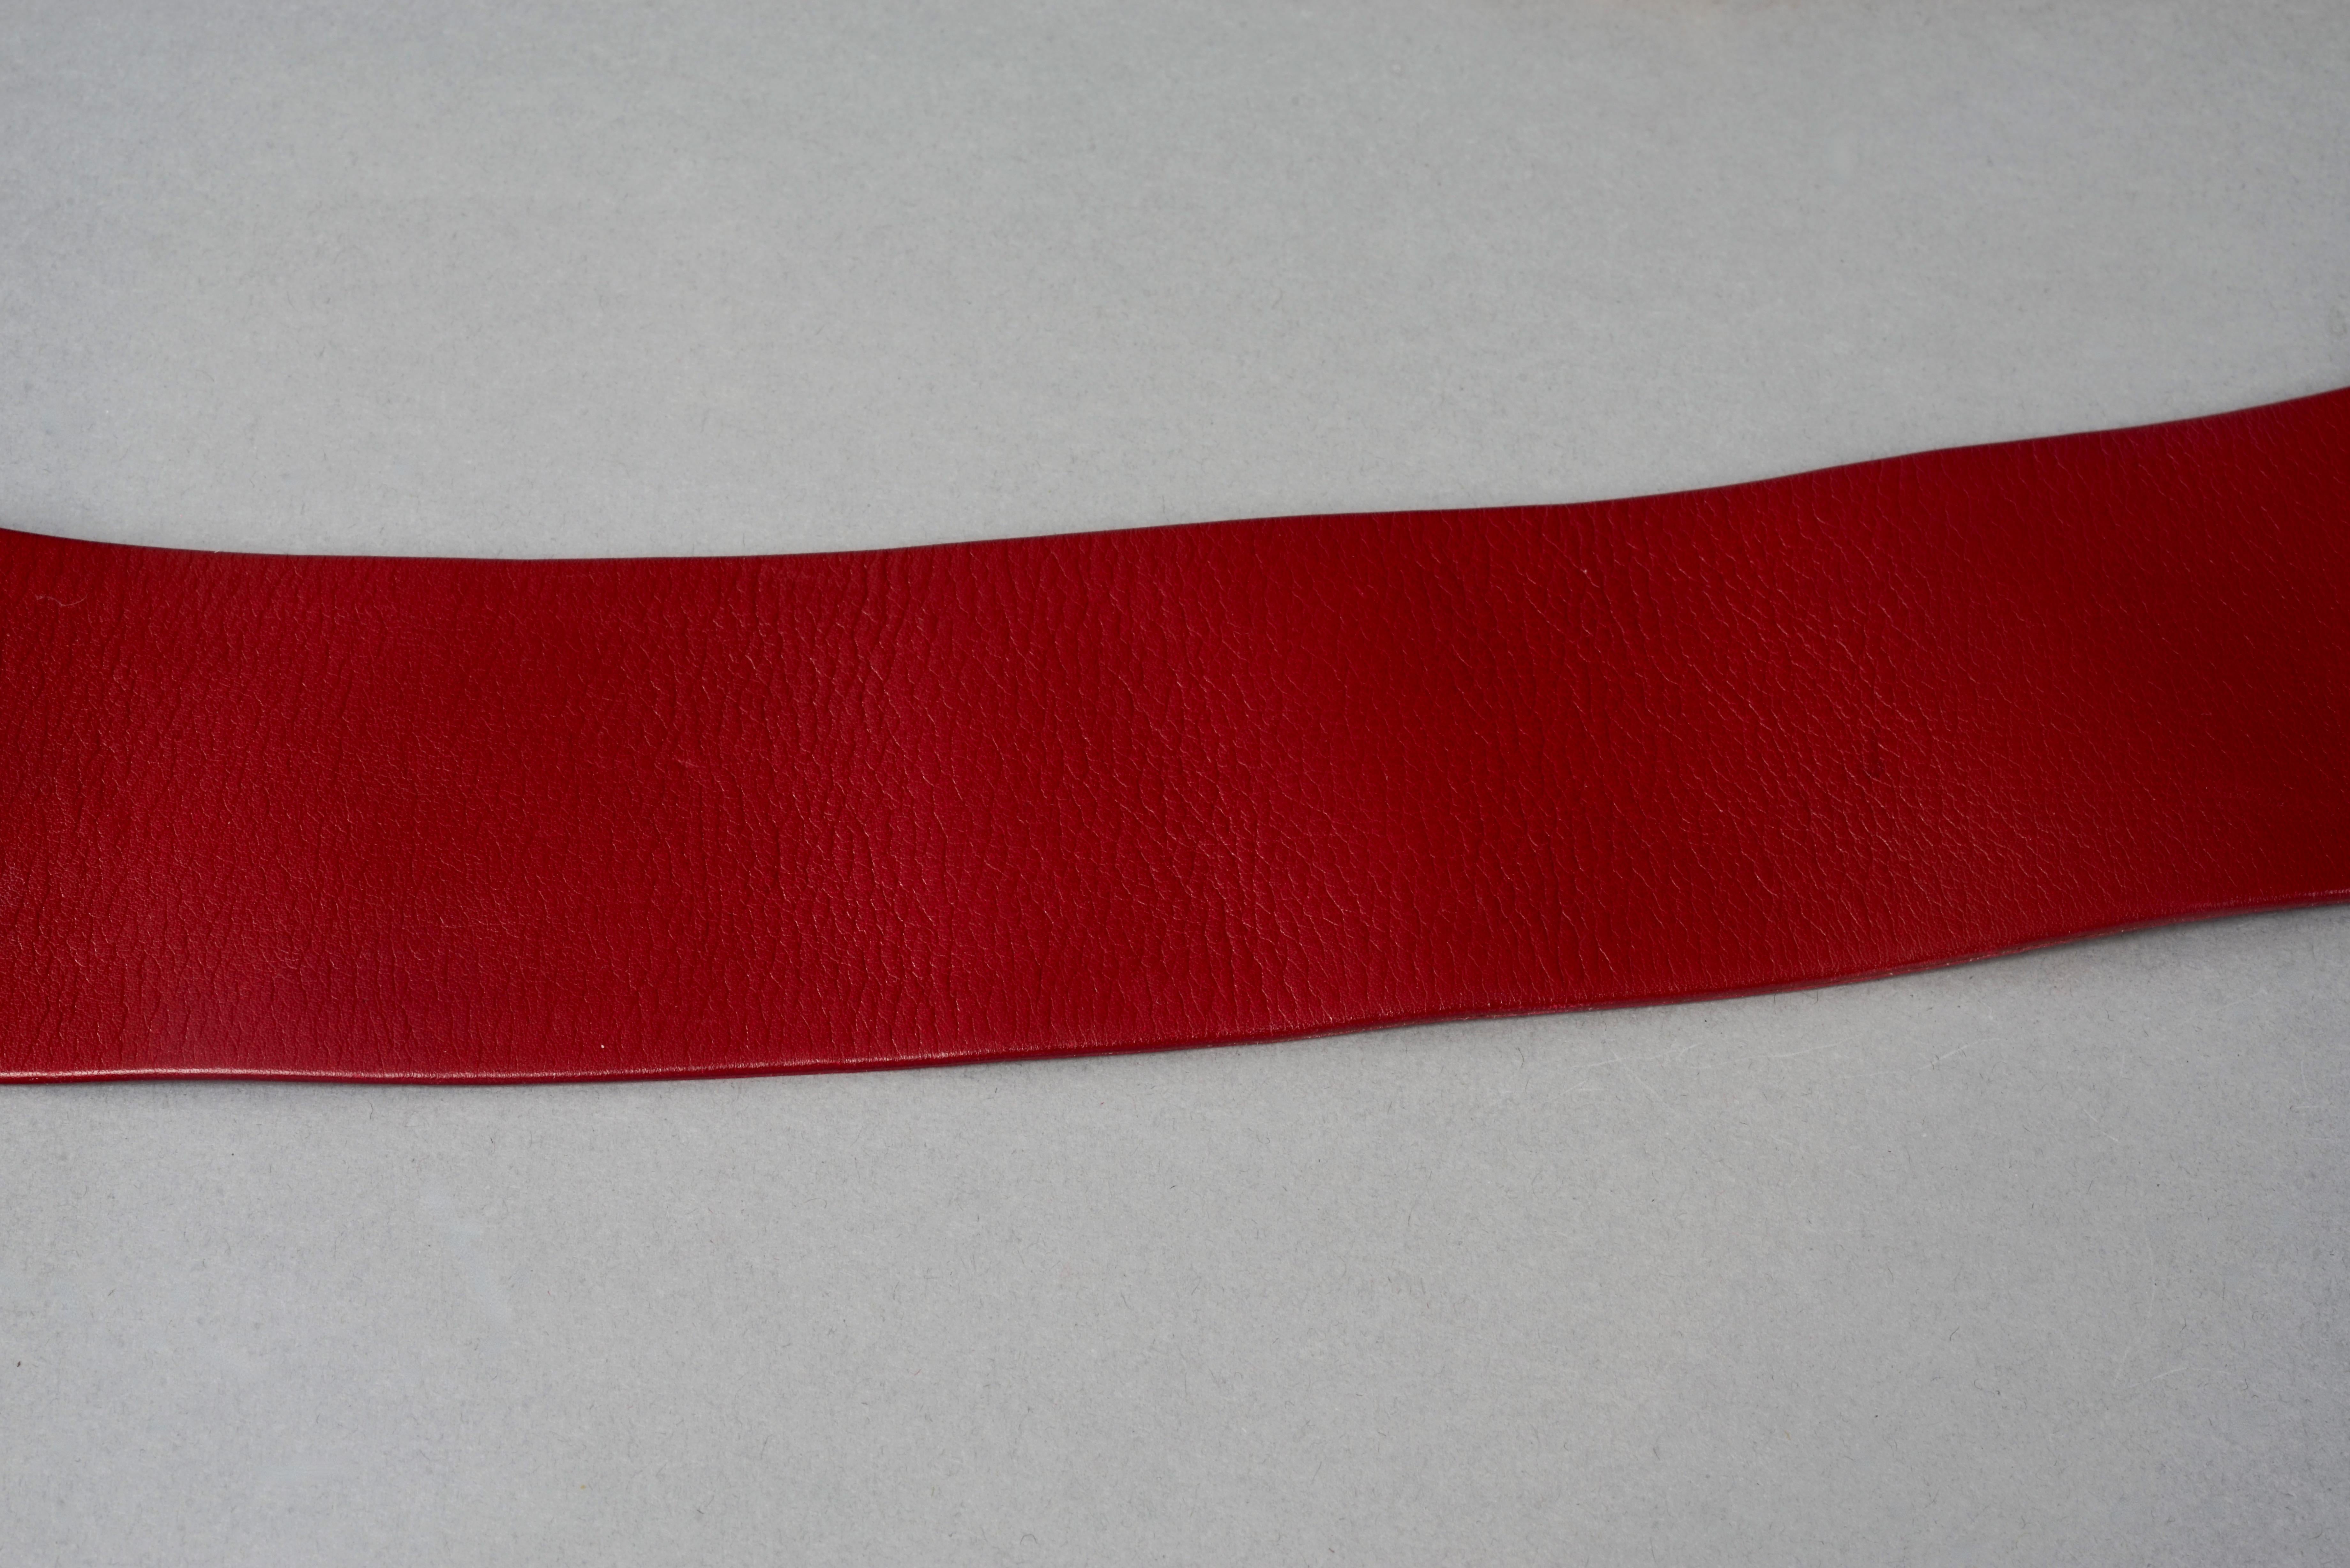 Vintage CHANEL Claudia Schiffer Wide Long Chain Medallion Red Leather Belt For Sale 3